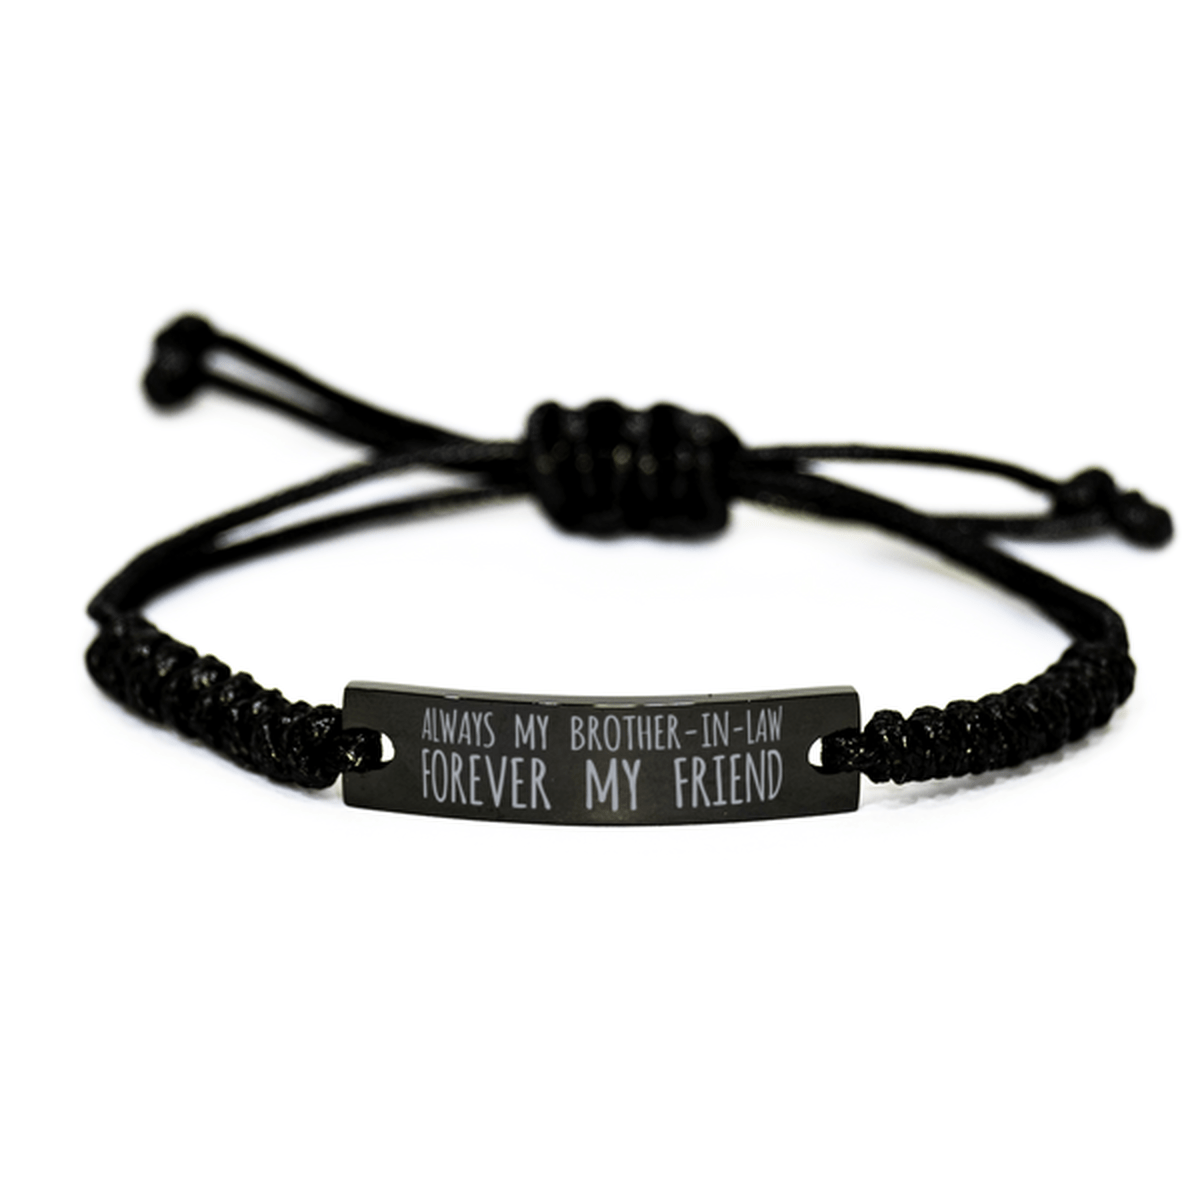 Inspirational Brother-In-Law Black Rope Bracelet, Always My Brother-In-Law Forever My Friend, Best Birthday Gifts For Family